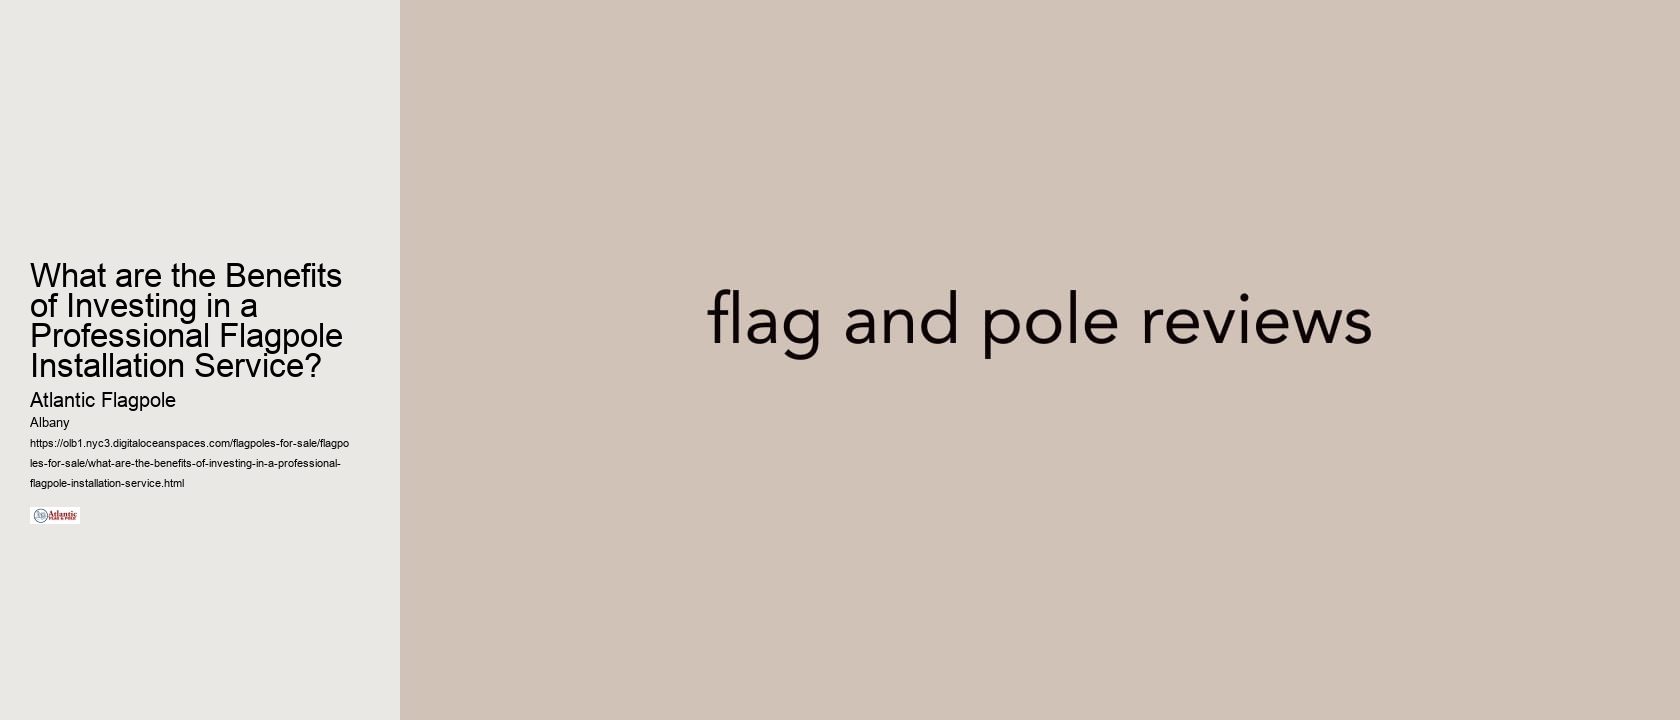 What are the Benefits of Investing in a Professional Flagpole Installation Service?